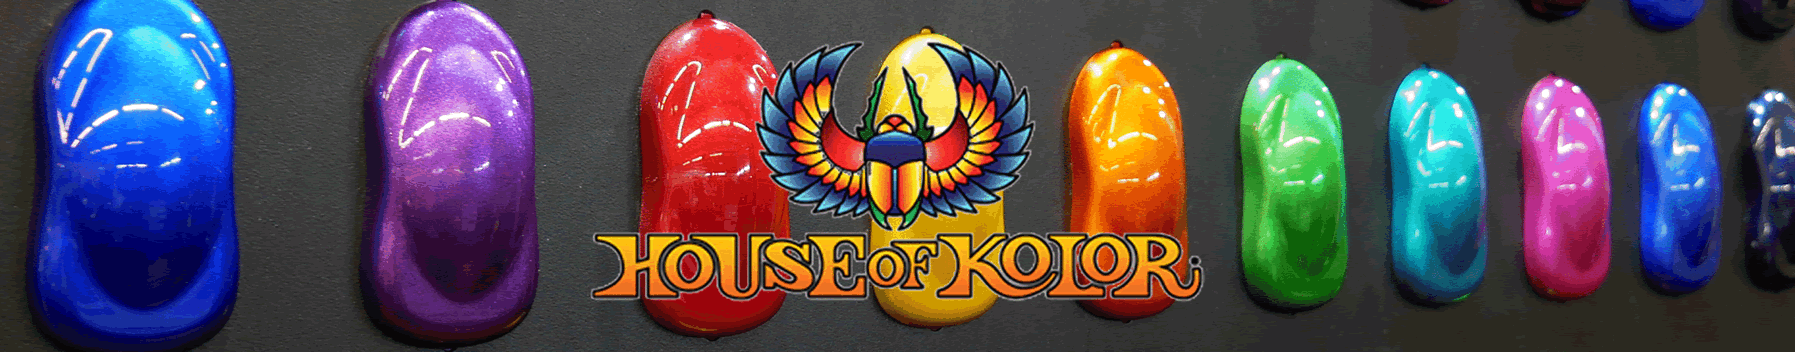 House Of Kolor From Jawel Paints - House Of Kolor Auto Paints